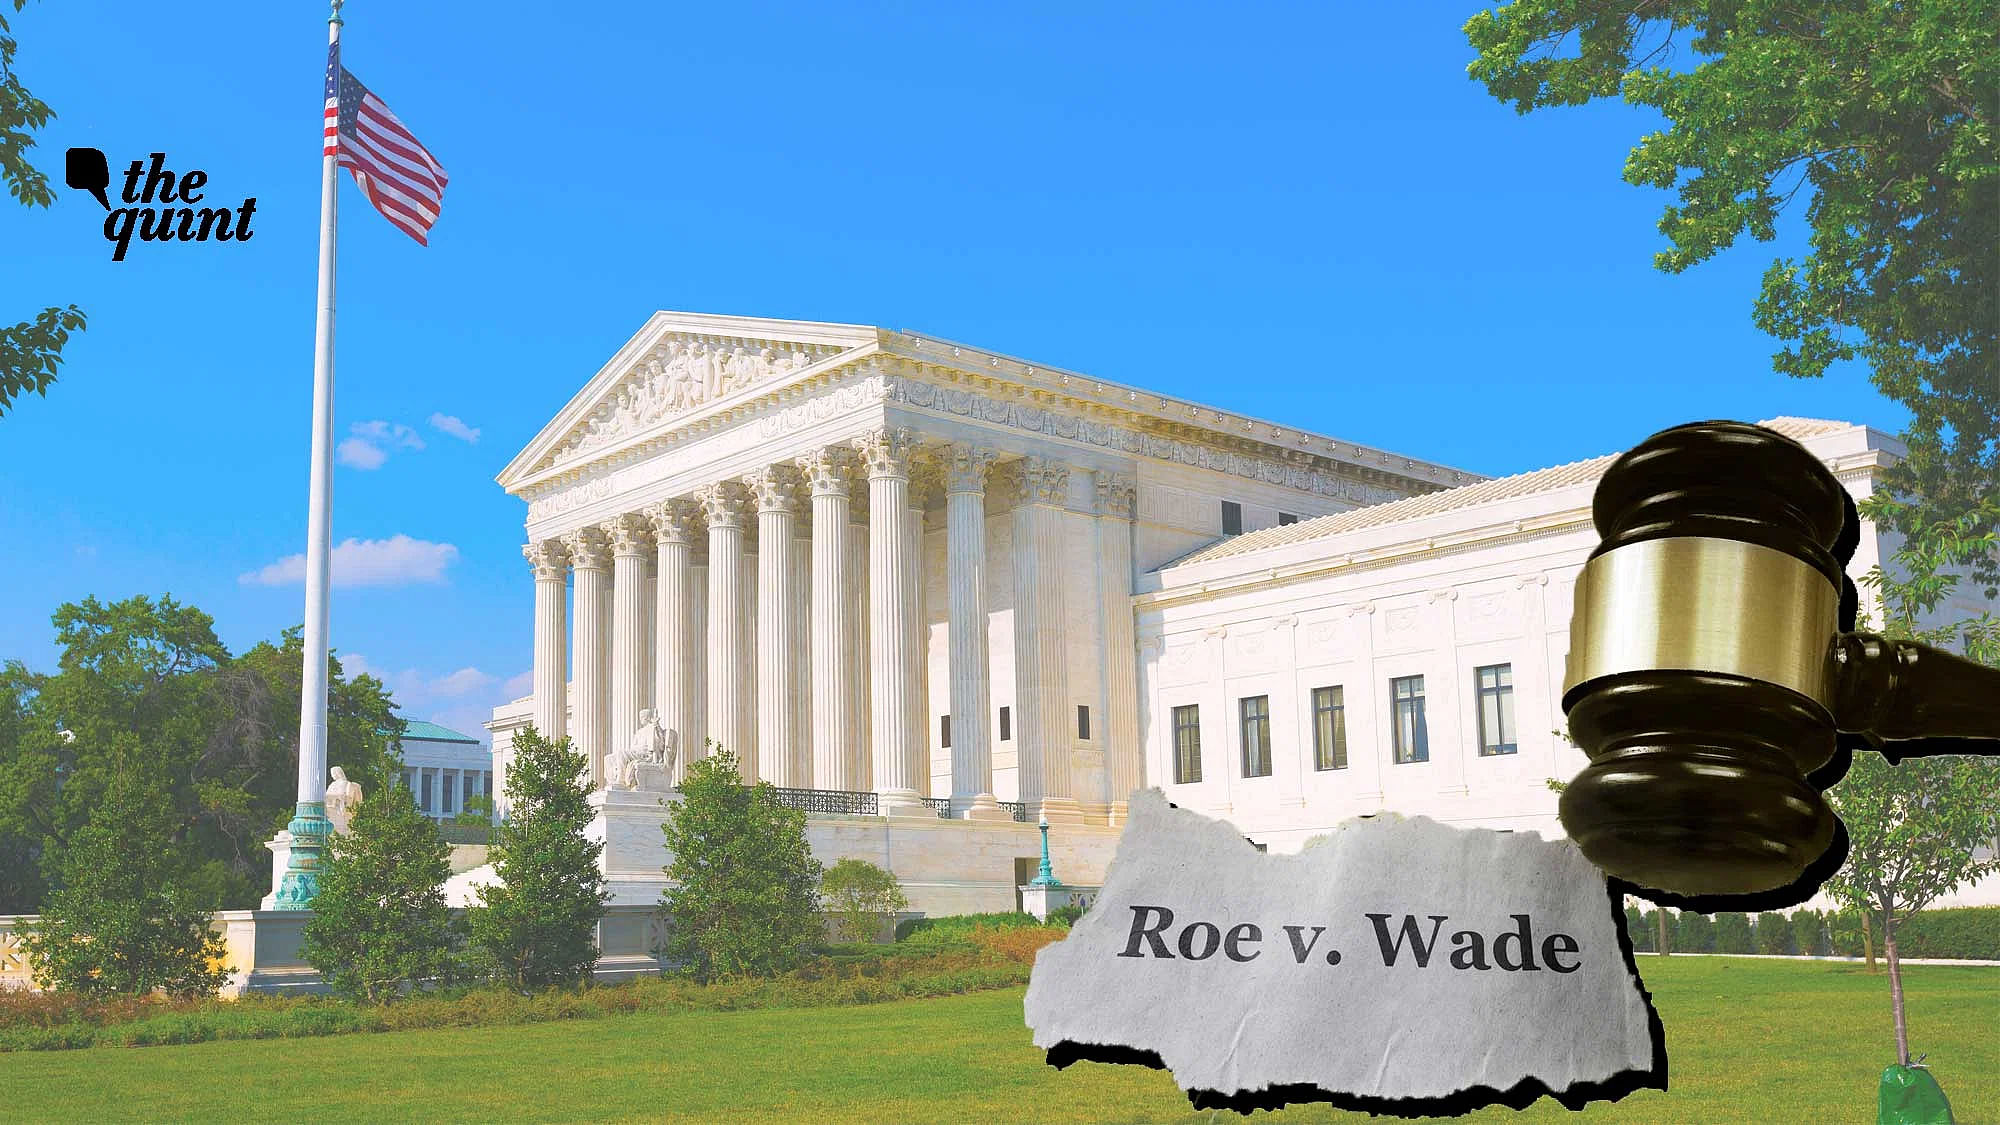 <div class="paragraphs"><p>According to news website <ins><a href="https://www.politico.com/news/2022/05/02/supreme-court-abortion-draft-opinion-00029473">Politico</a></ins>, the US supreme court has voted to strike down <ins><a href="https://www.oyez.org/cases/1971/70-18">Roe v. Wade</a></ins> – the key 1973 decision that gave women a broad right to abortion.</p></div>